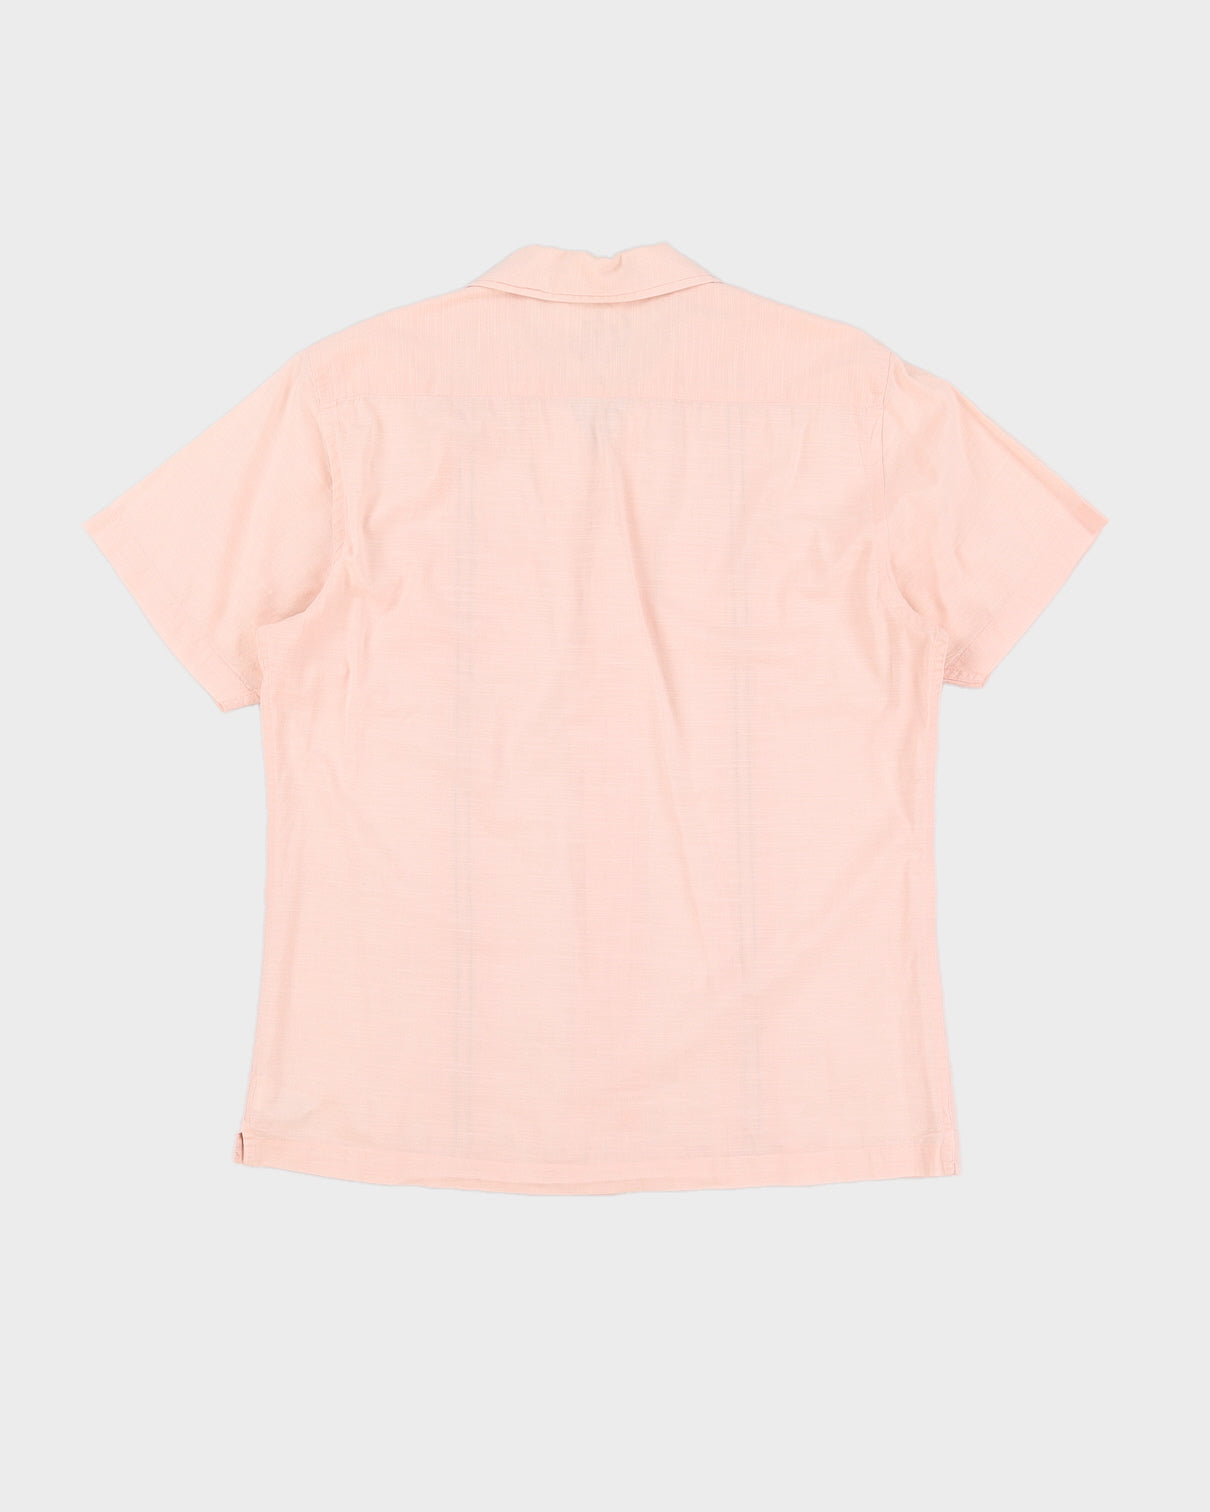 00s Y2K Guess Pink Short Sleeved Shirt - M